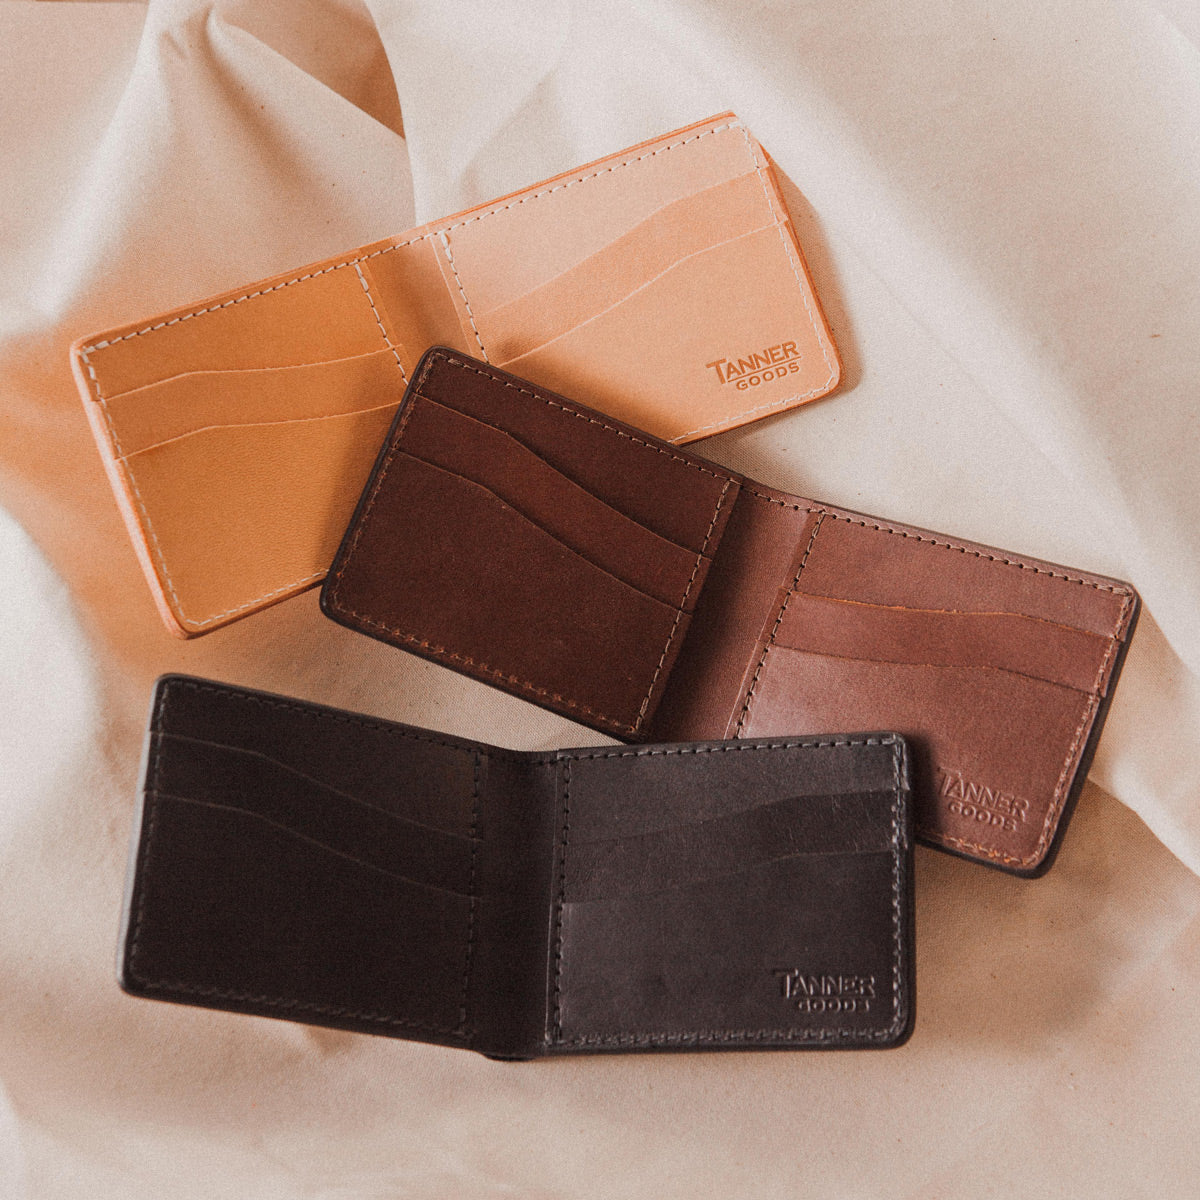 Three bifold wallets laying open